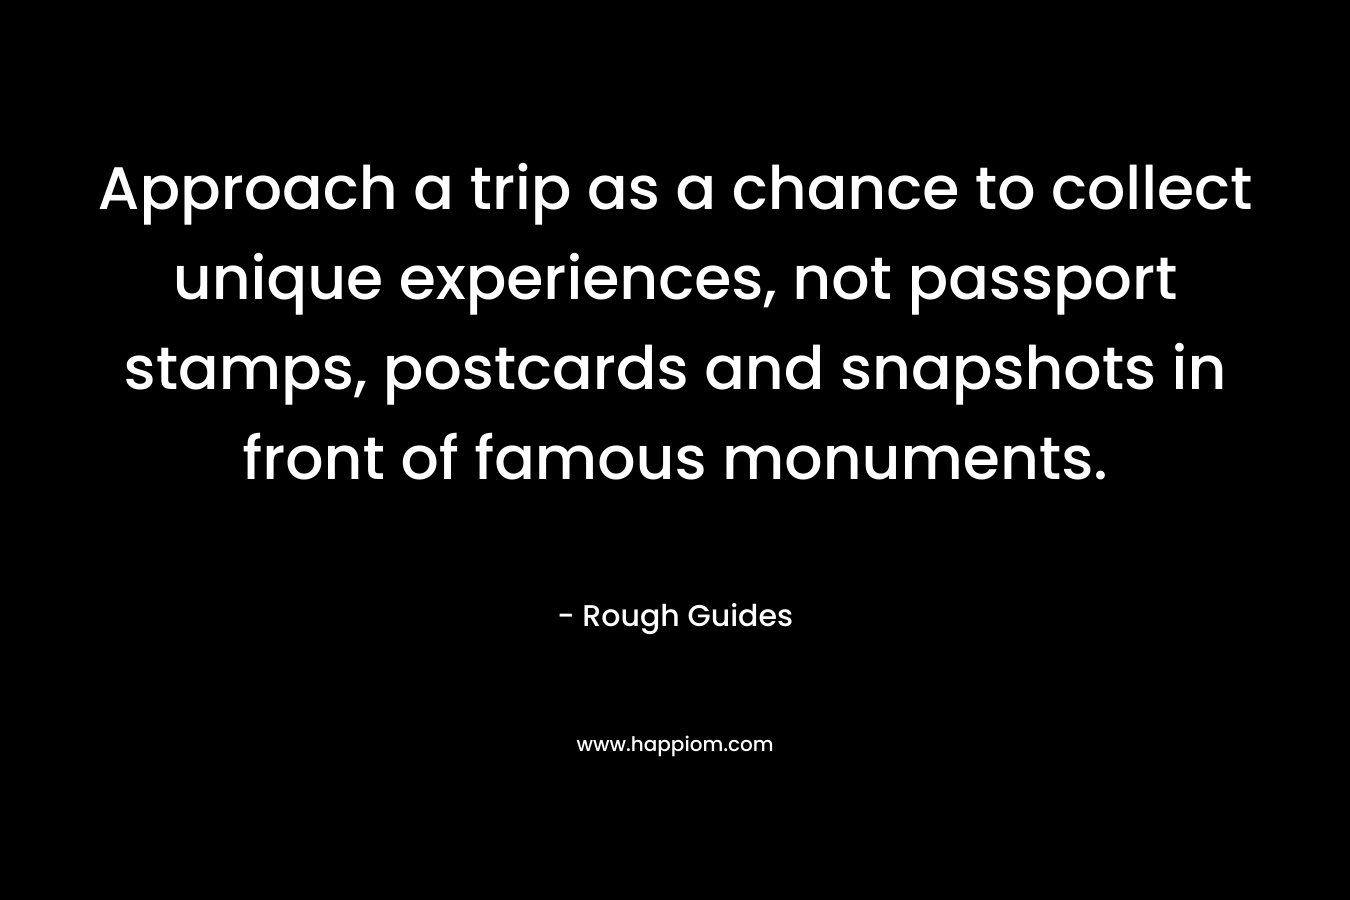 Approach a trip as a chance to collect unique experiences, not passport stamps, postcards and snapshots in front of famous monuments. – Rough Guides